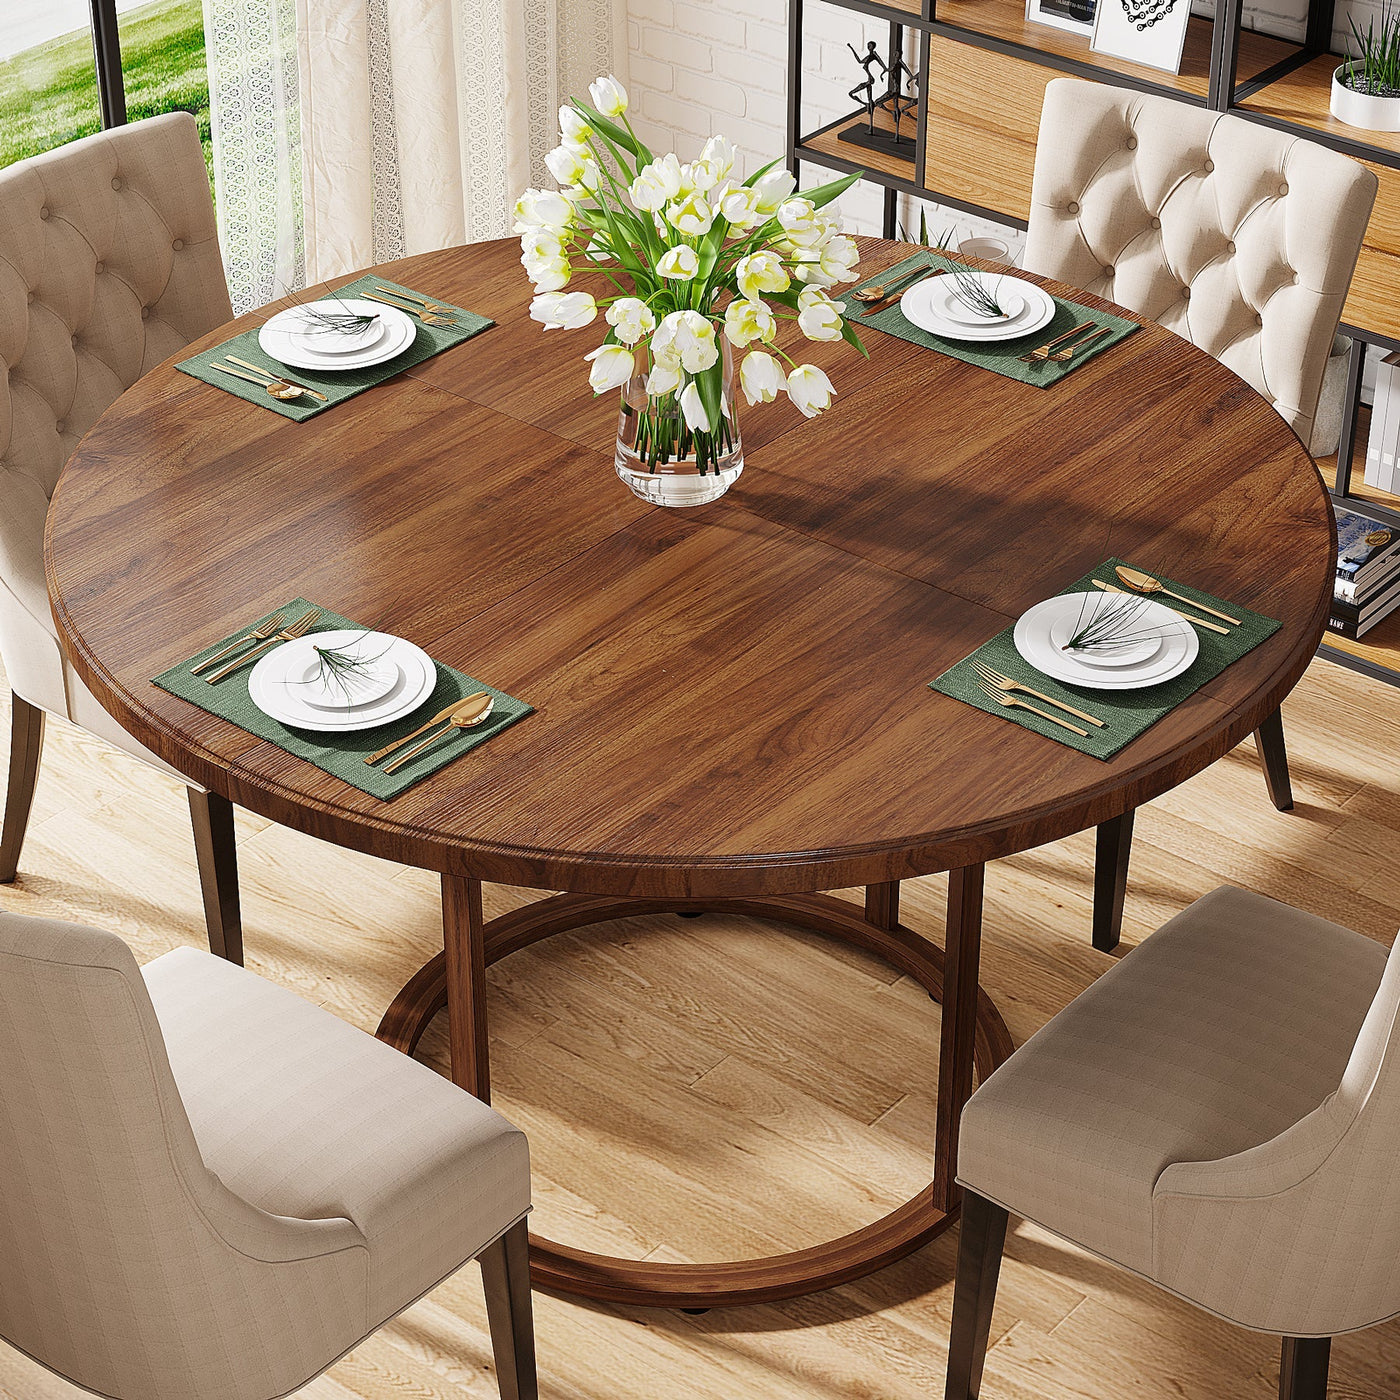 Doutre 47" Round Wooden Dining Table with 4 Divided Storage Shelves for 4 to 6